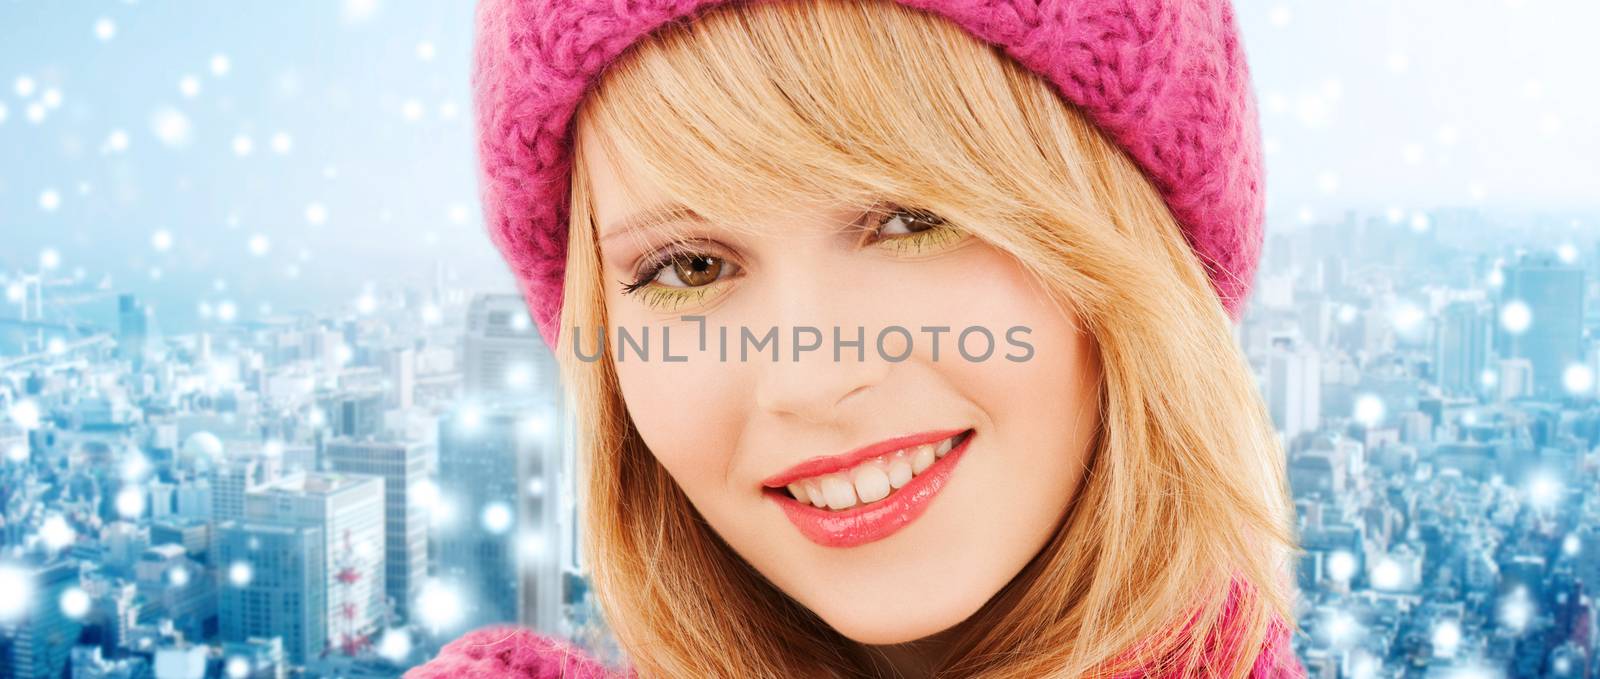 happiness, winter holidays, christmas and people concept - close up of smiling young woman in pink hat and scarf over blue snowy background